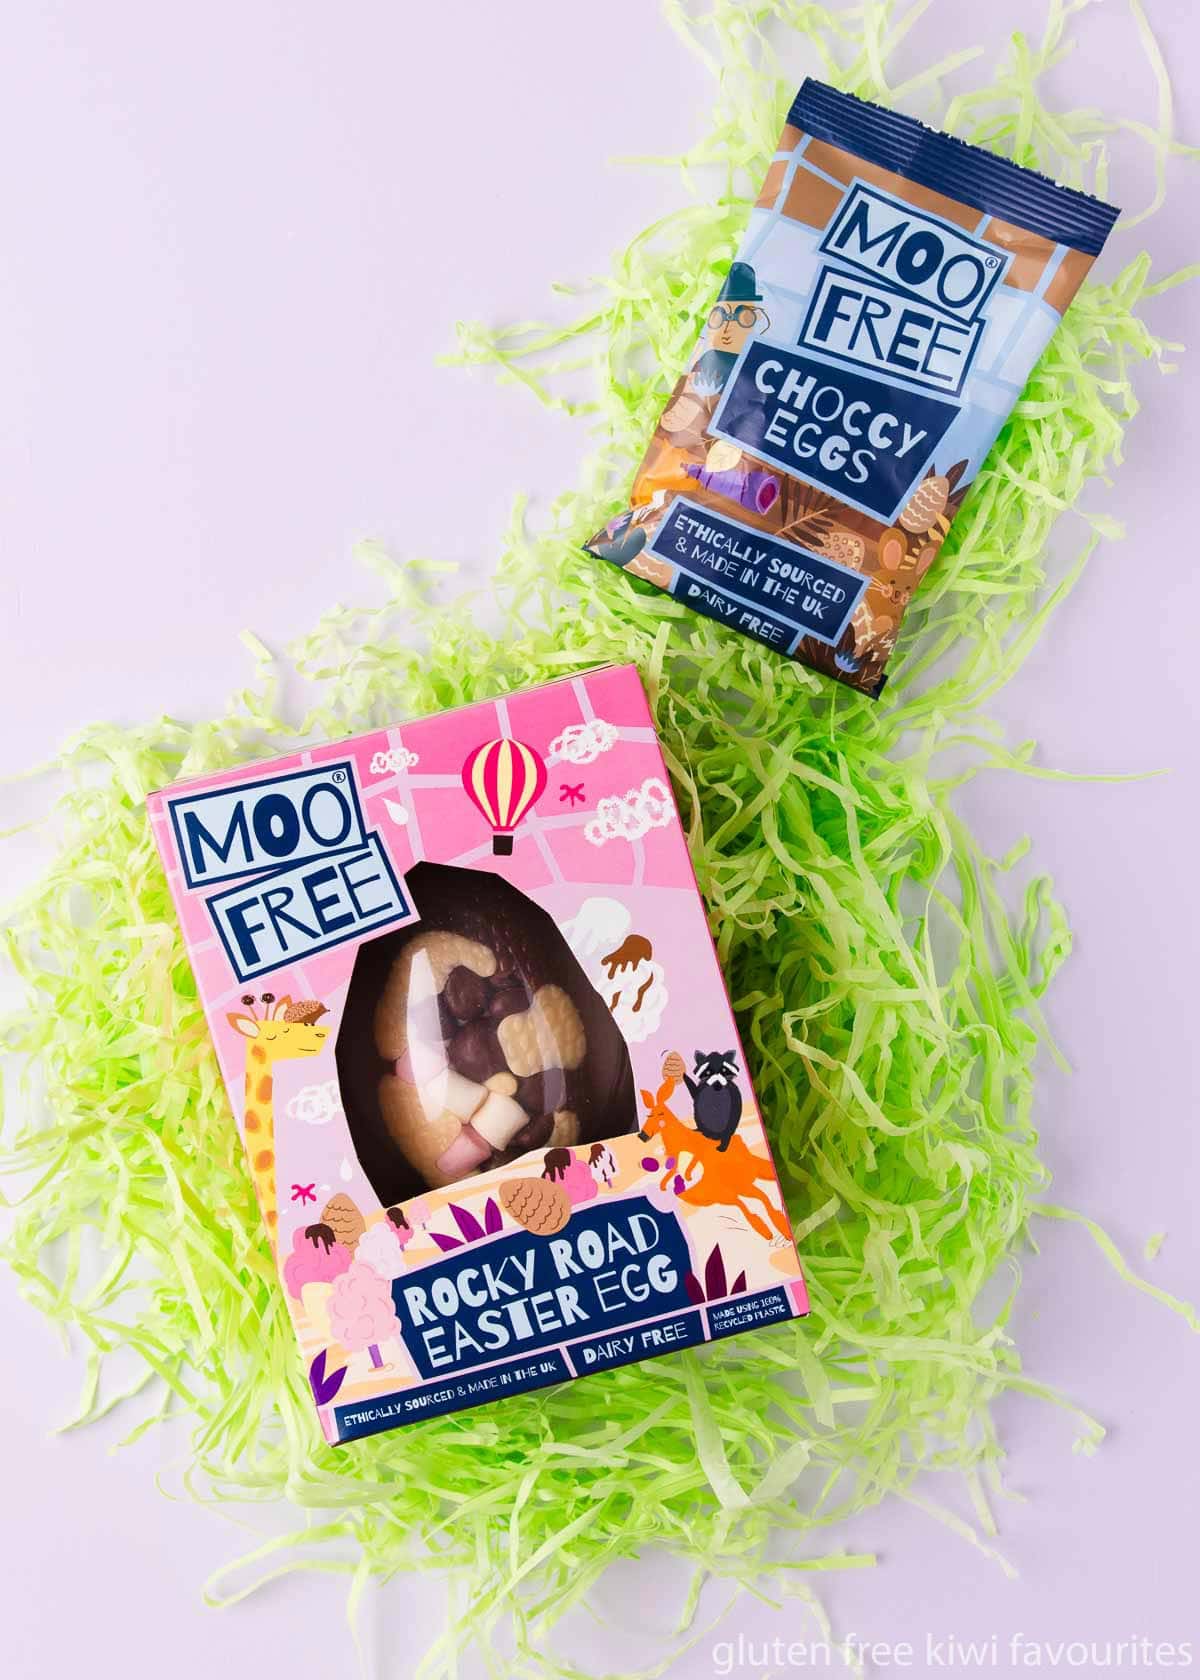 A Moo Free rocky road Easter egg in a colourful box, and a small blue bag of Moo Free mini choccy eggs, on green shredded paper, on a light purple background.